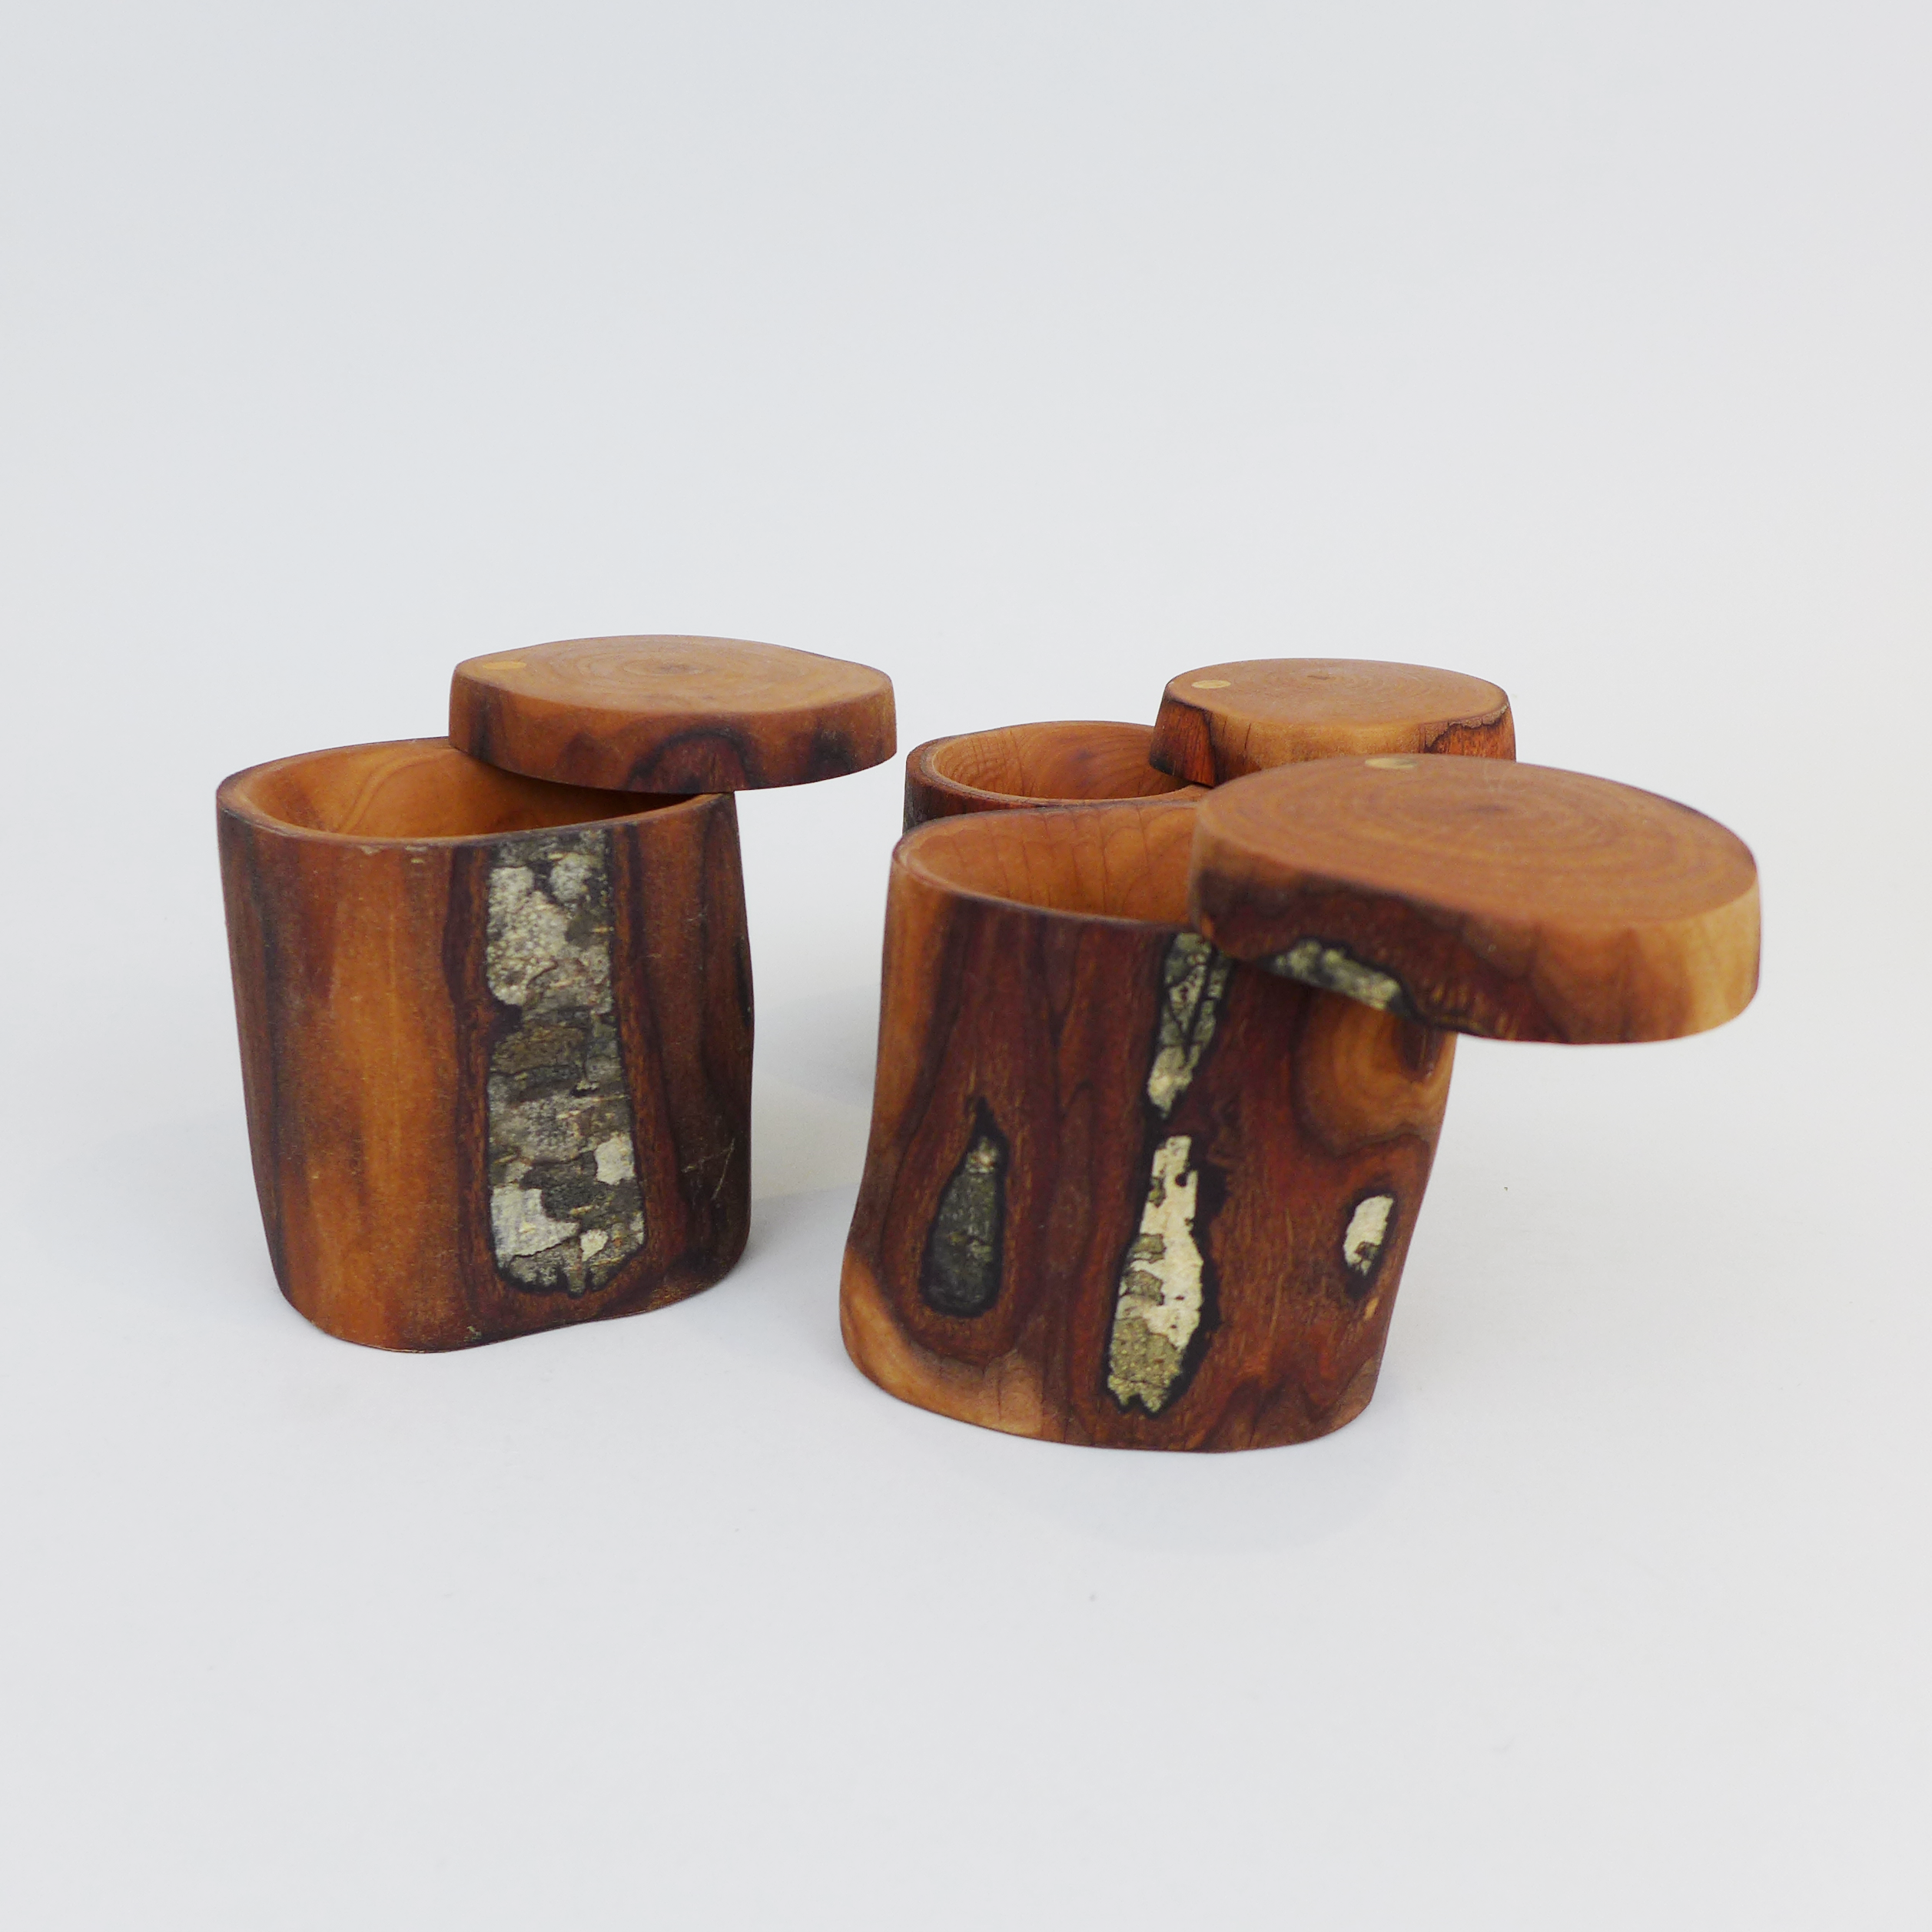 Lidded box is handcrafted of Oregon Alder by Out of the Woods at the Center for the Art in Wood